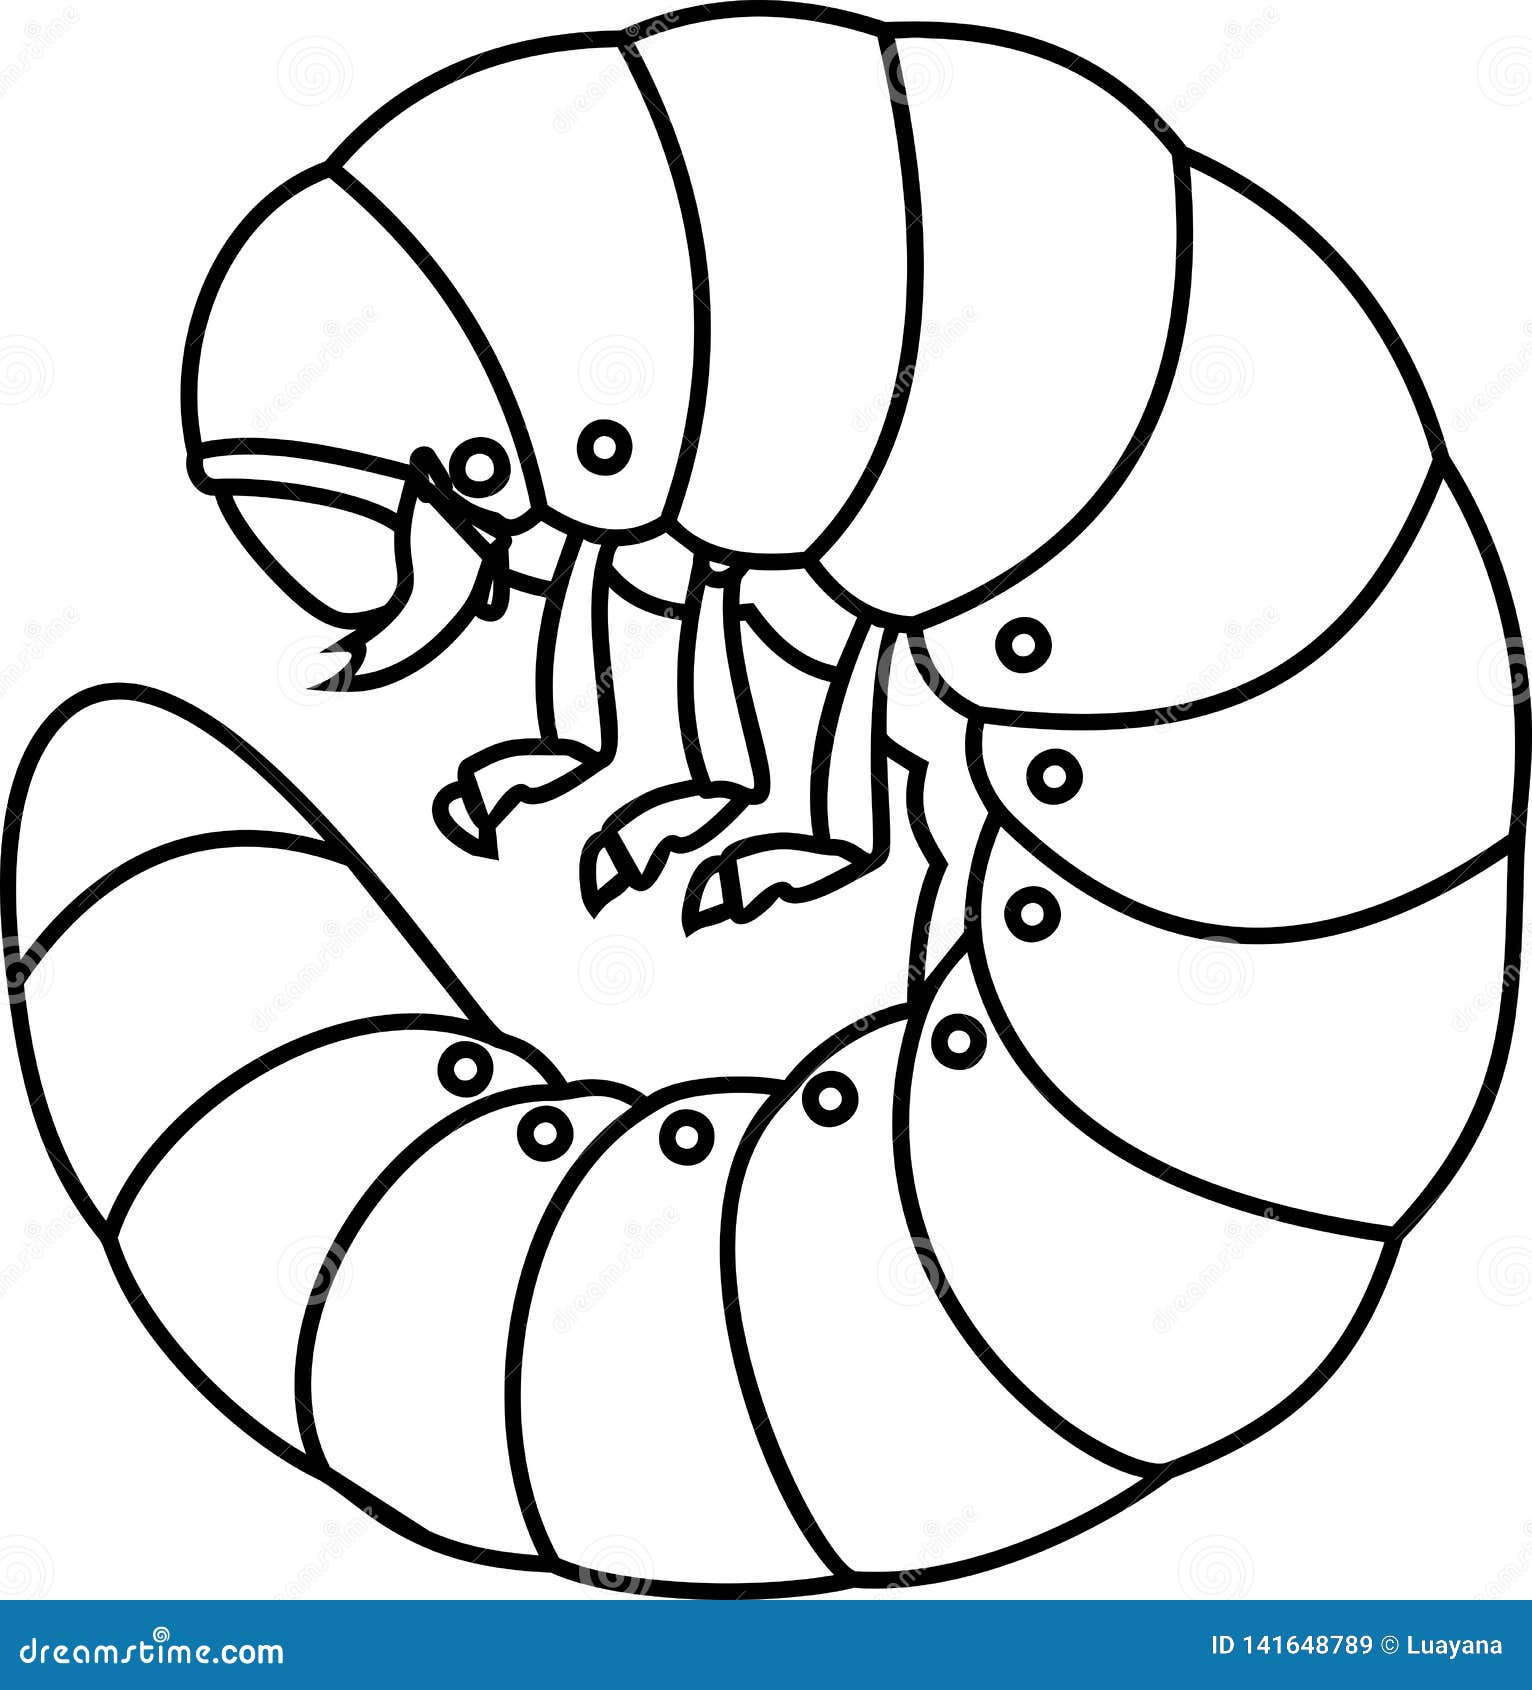 Coloring page with larva grub of cockchafer or may bug stock vector